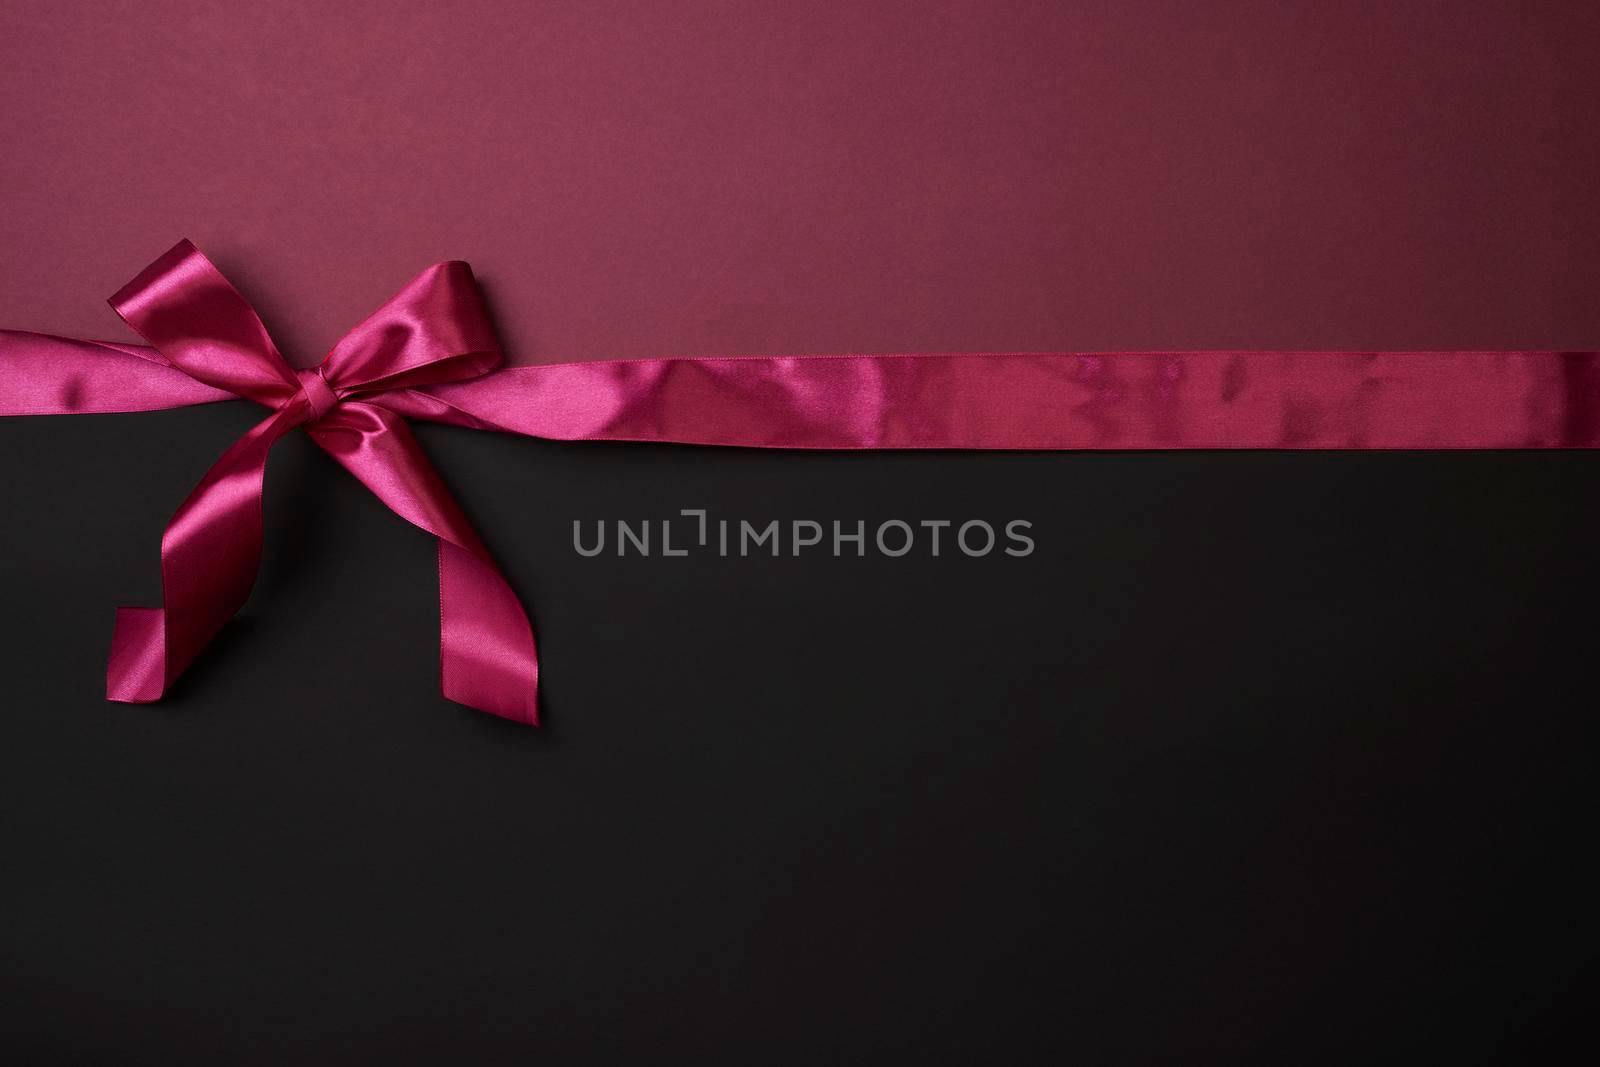 Creative Black Friday concept made with pink ribbon on dark background